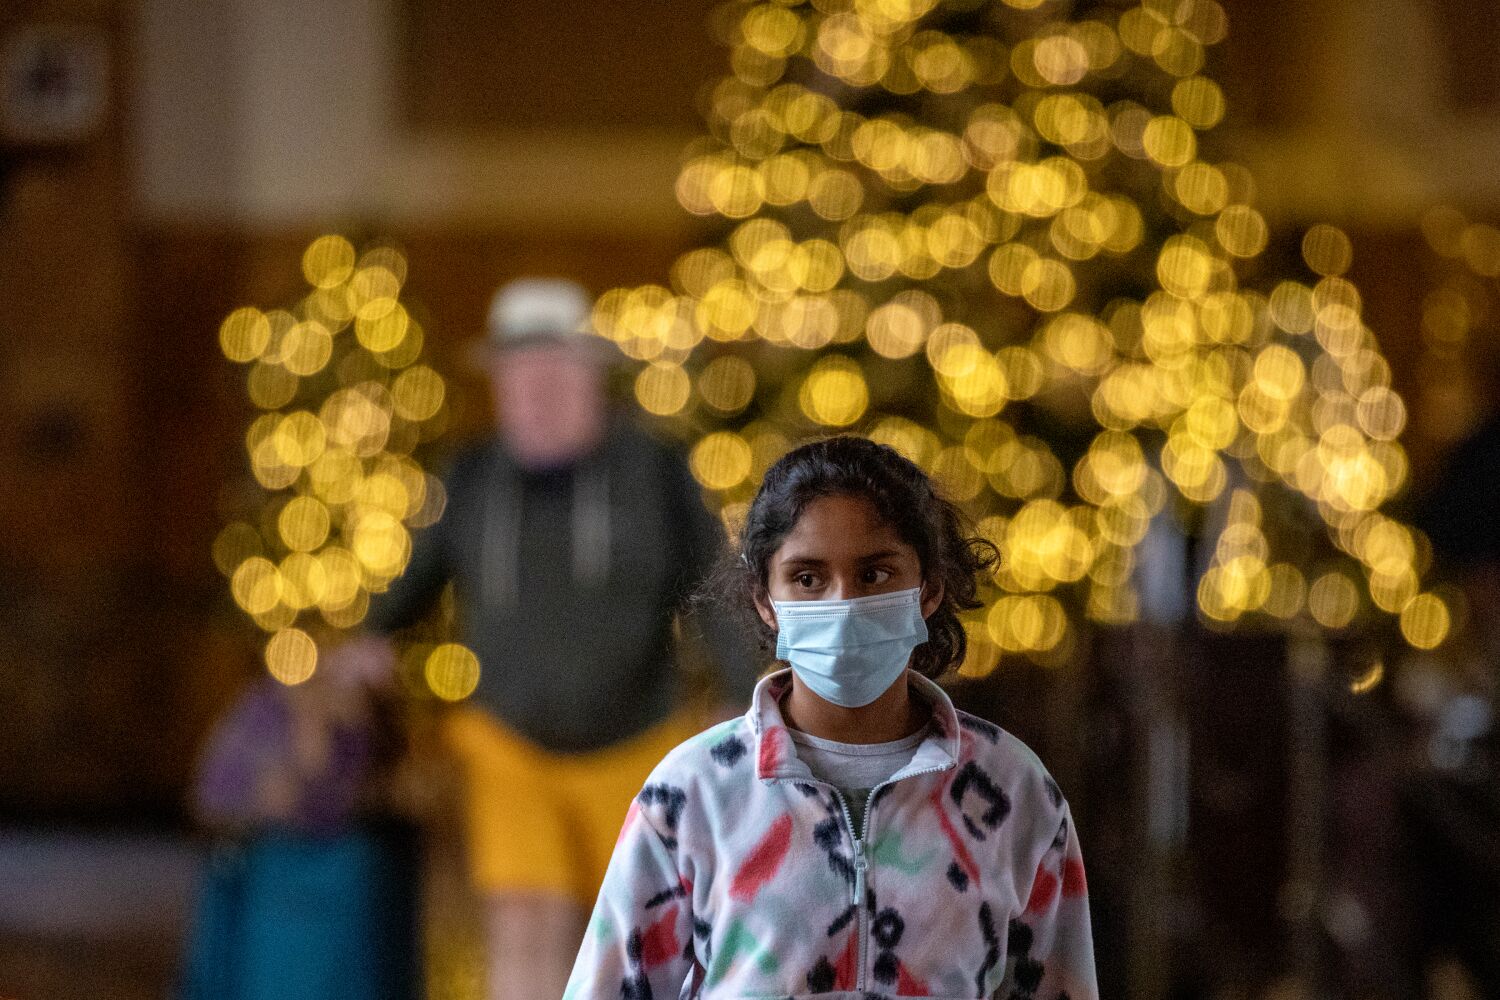 Health officials are urging masks again amid high COVID, flu levels